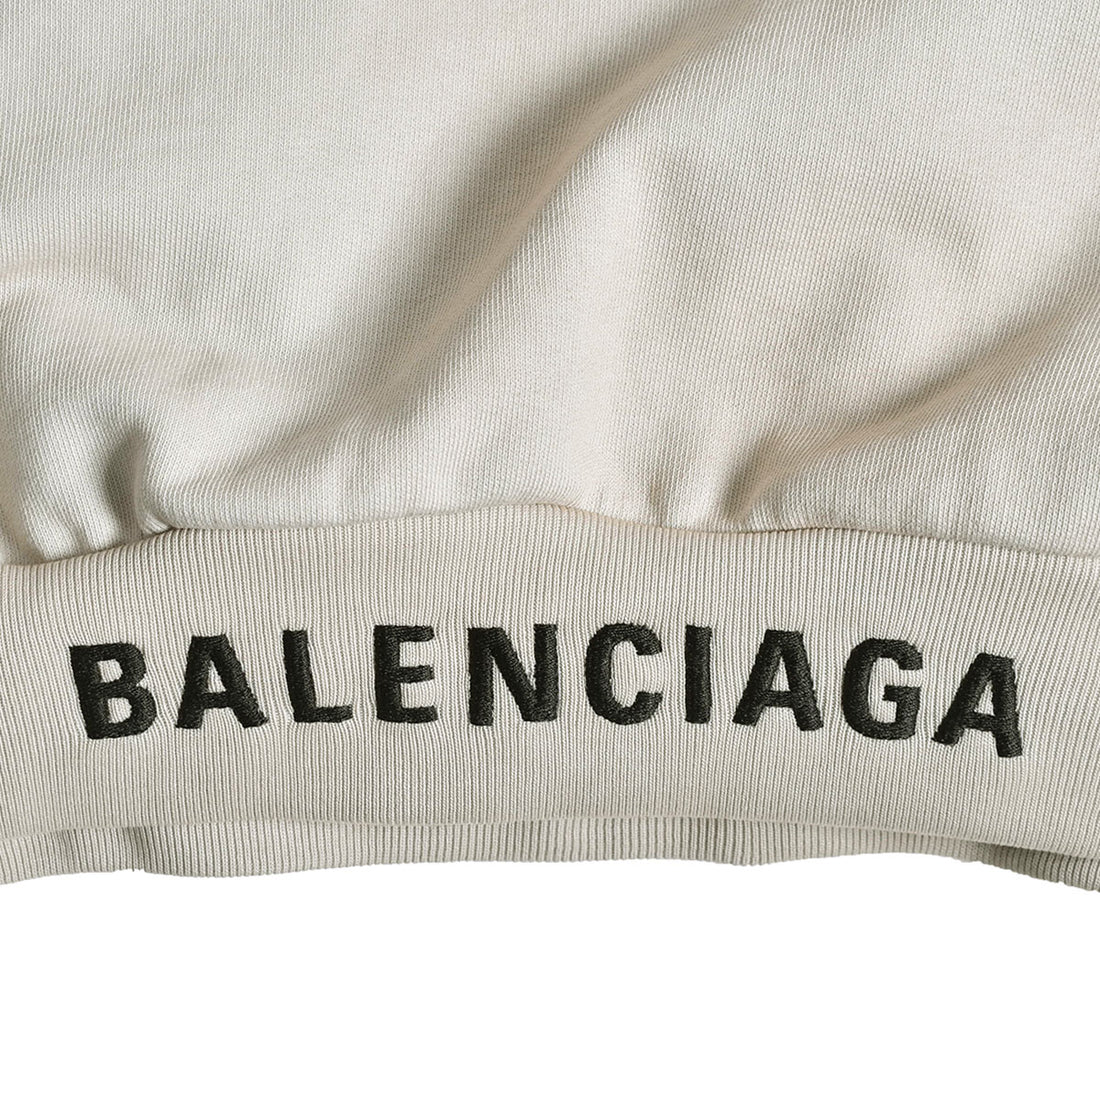 [BALENCIAGA]Large Fit Hoodie/OFF WHITE(739024TOVF3)